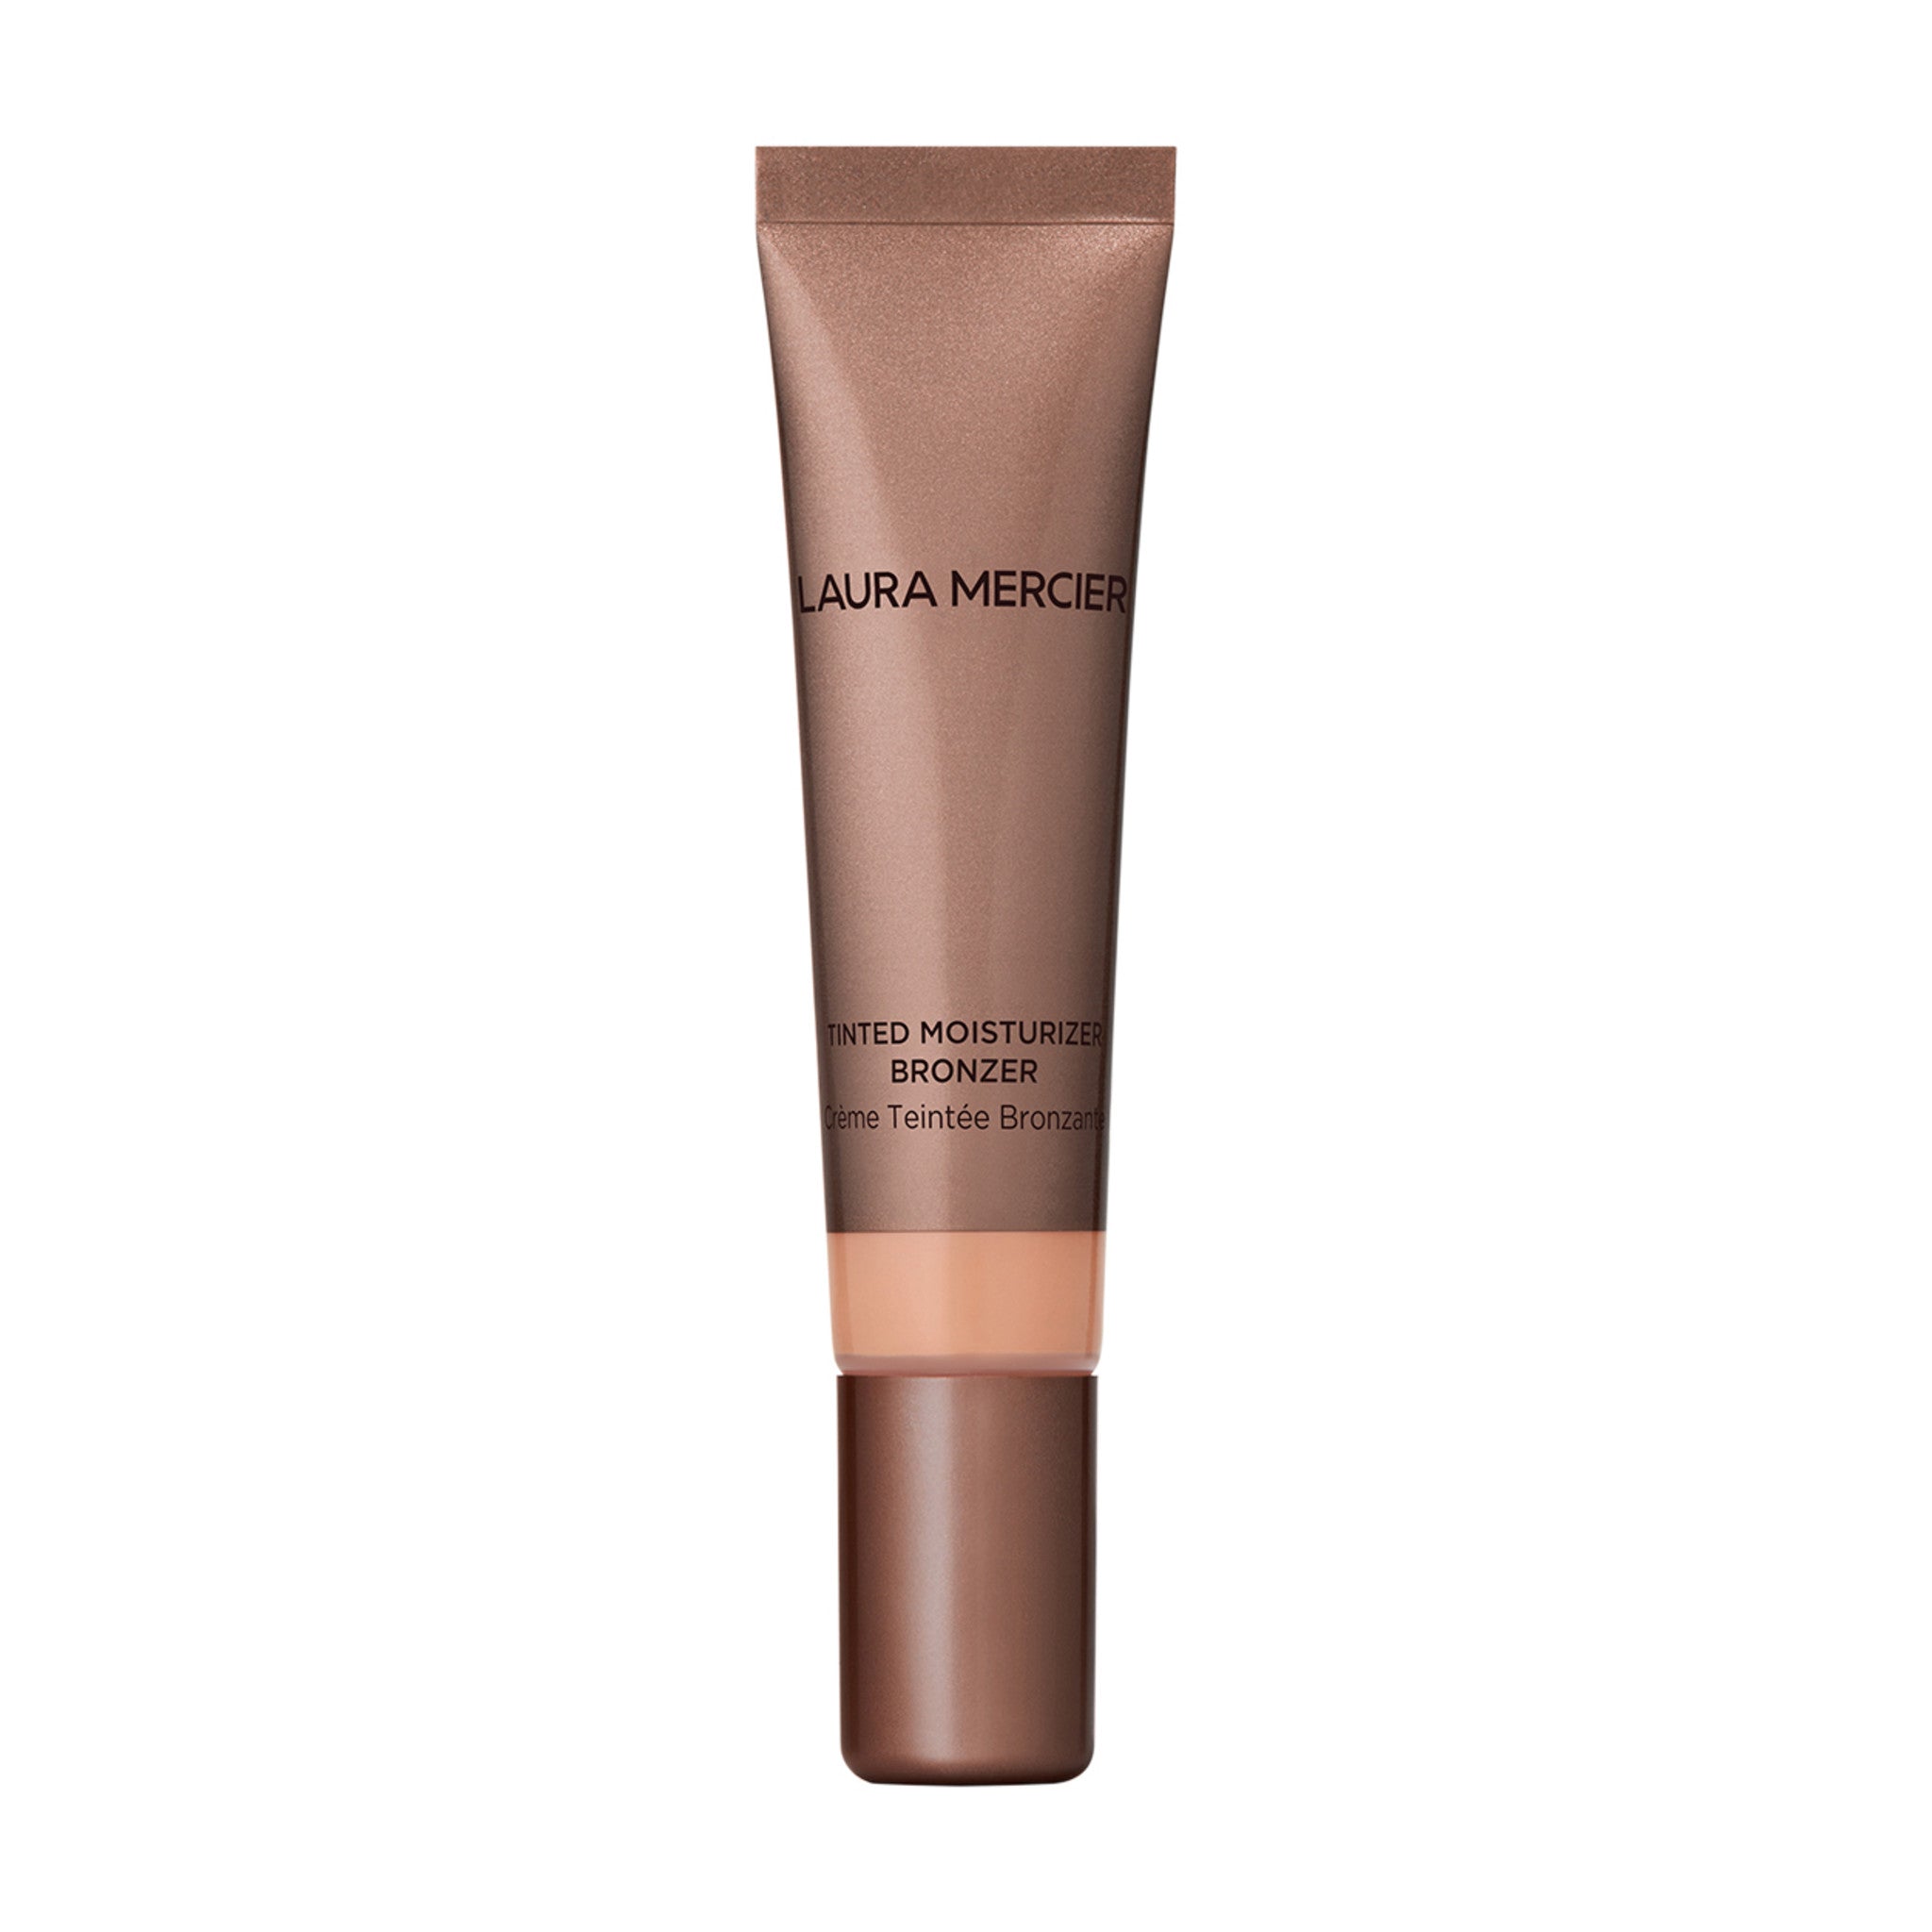 Laura Mercier Tinted Moisturizer Bronzer Color/Shade variant: 02 Sundrop main image. This product is for light complexions